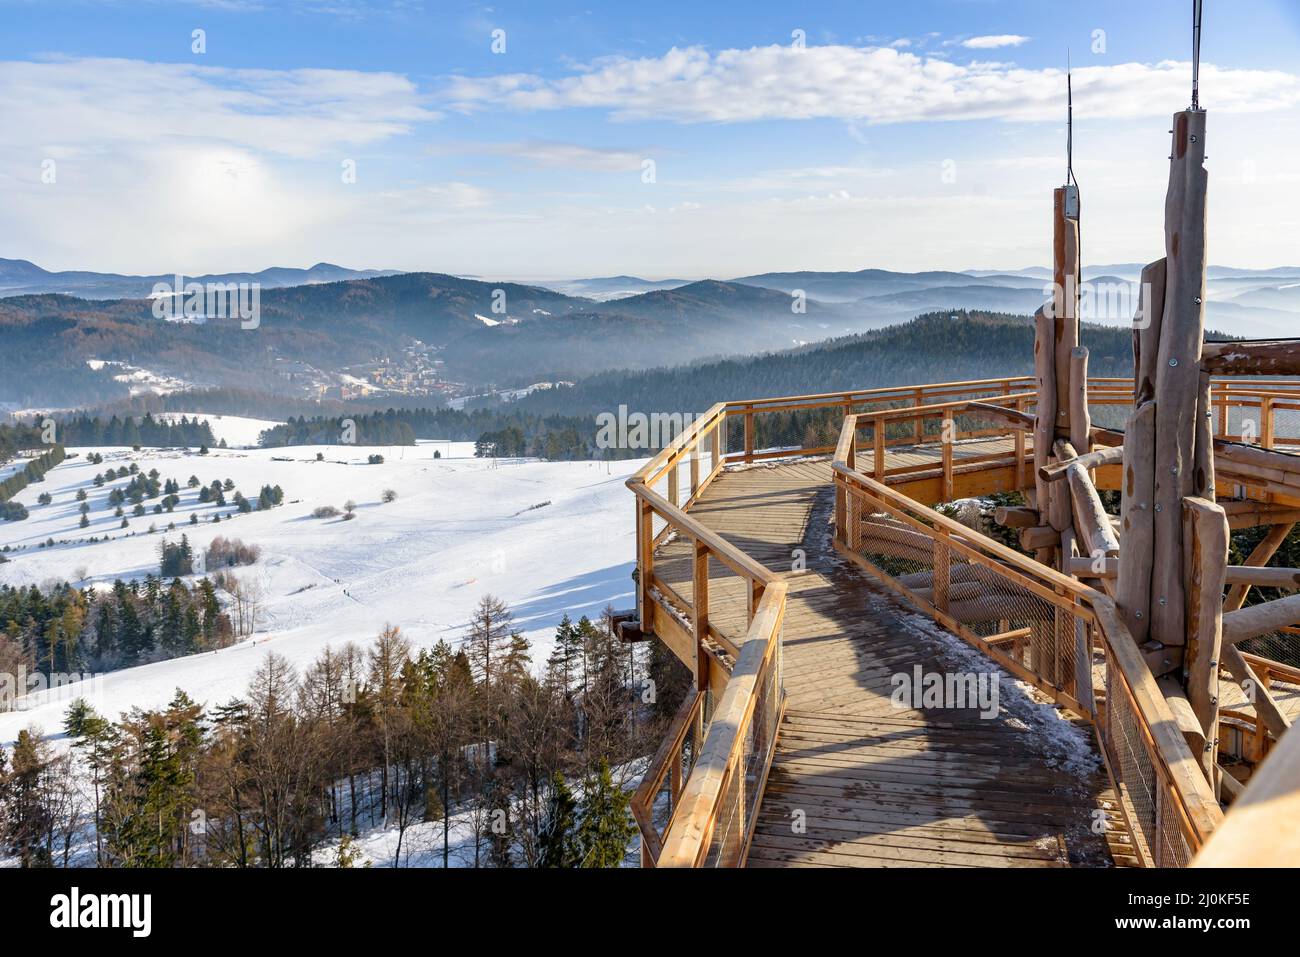 Beskid mountain winter landscape seen from the wooden path of the treetop observation tower at Slotwiny Arena ski station in Krynica Zdroj, Poland Stock Photo